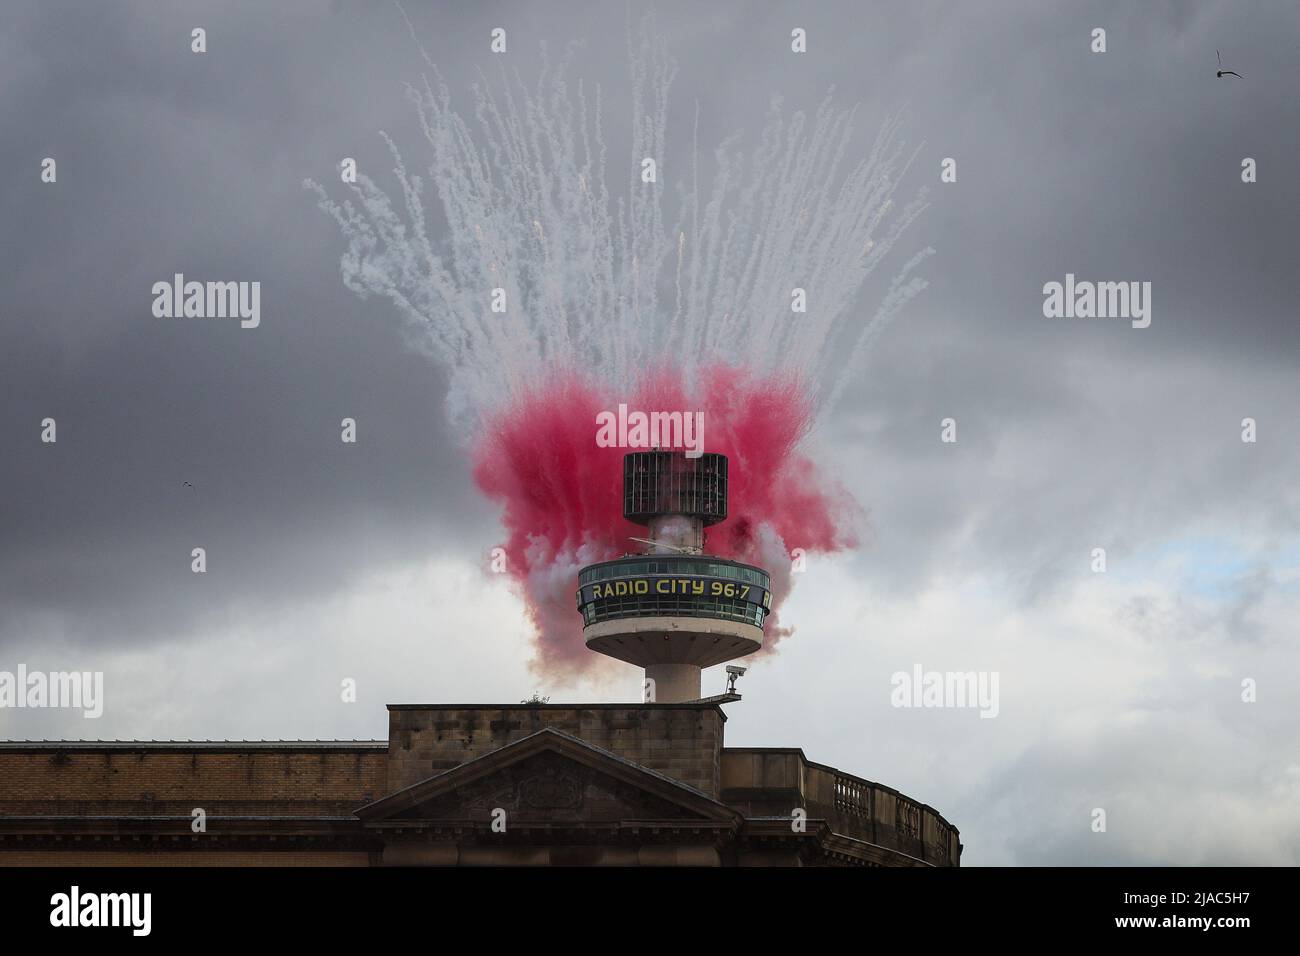 Liverpool, UK. 29th May, 2022. The Radio City 96.7 lets off fireworks and flares as the Liverpool FC squad celebrate during the open top bus parade through the city after winning both the Carabao Cup and the FA Cup in the 2021/22 season in Liverpool, United Kingdom on 5/29/2022. (Photo by James Heaton/News Images/Sipa USA) Credit: Sipa USA/Alamy Live News Stock Photo